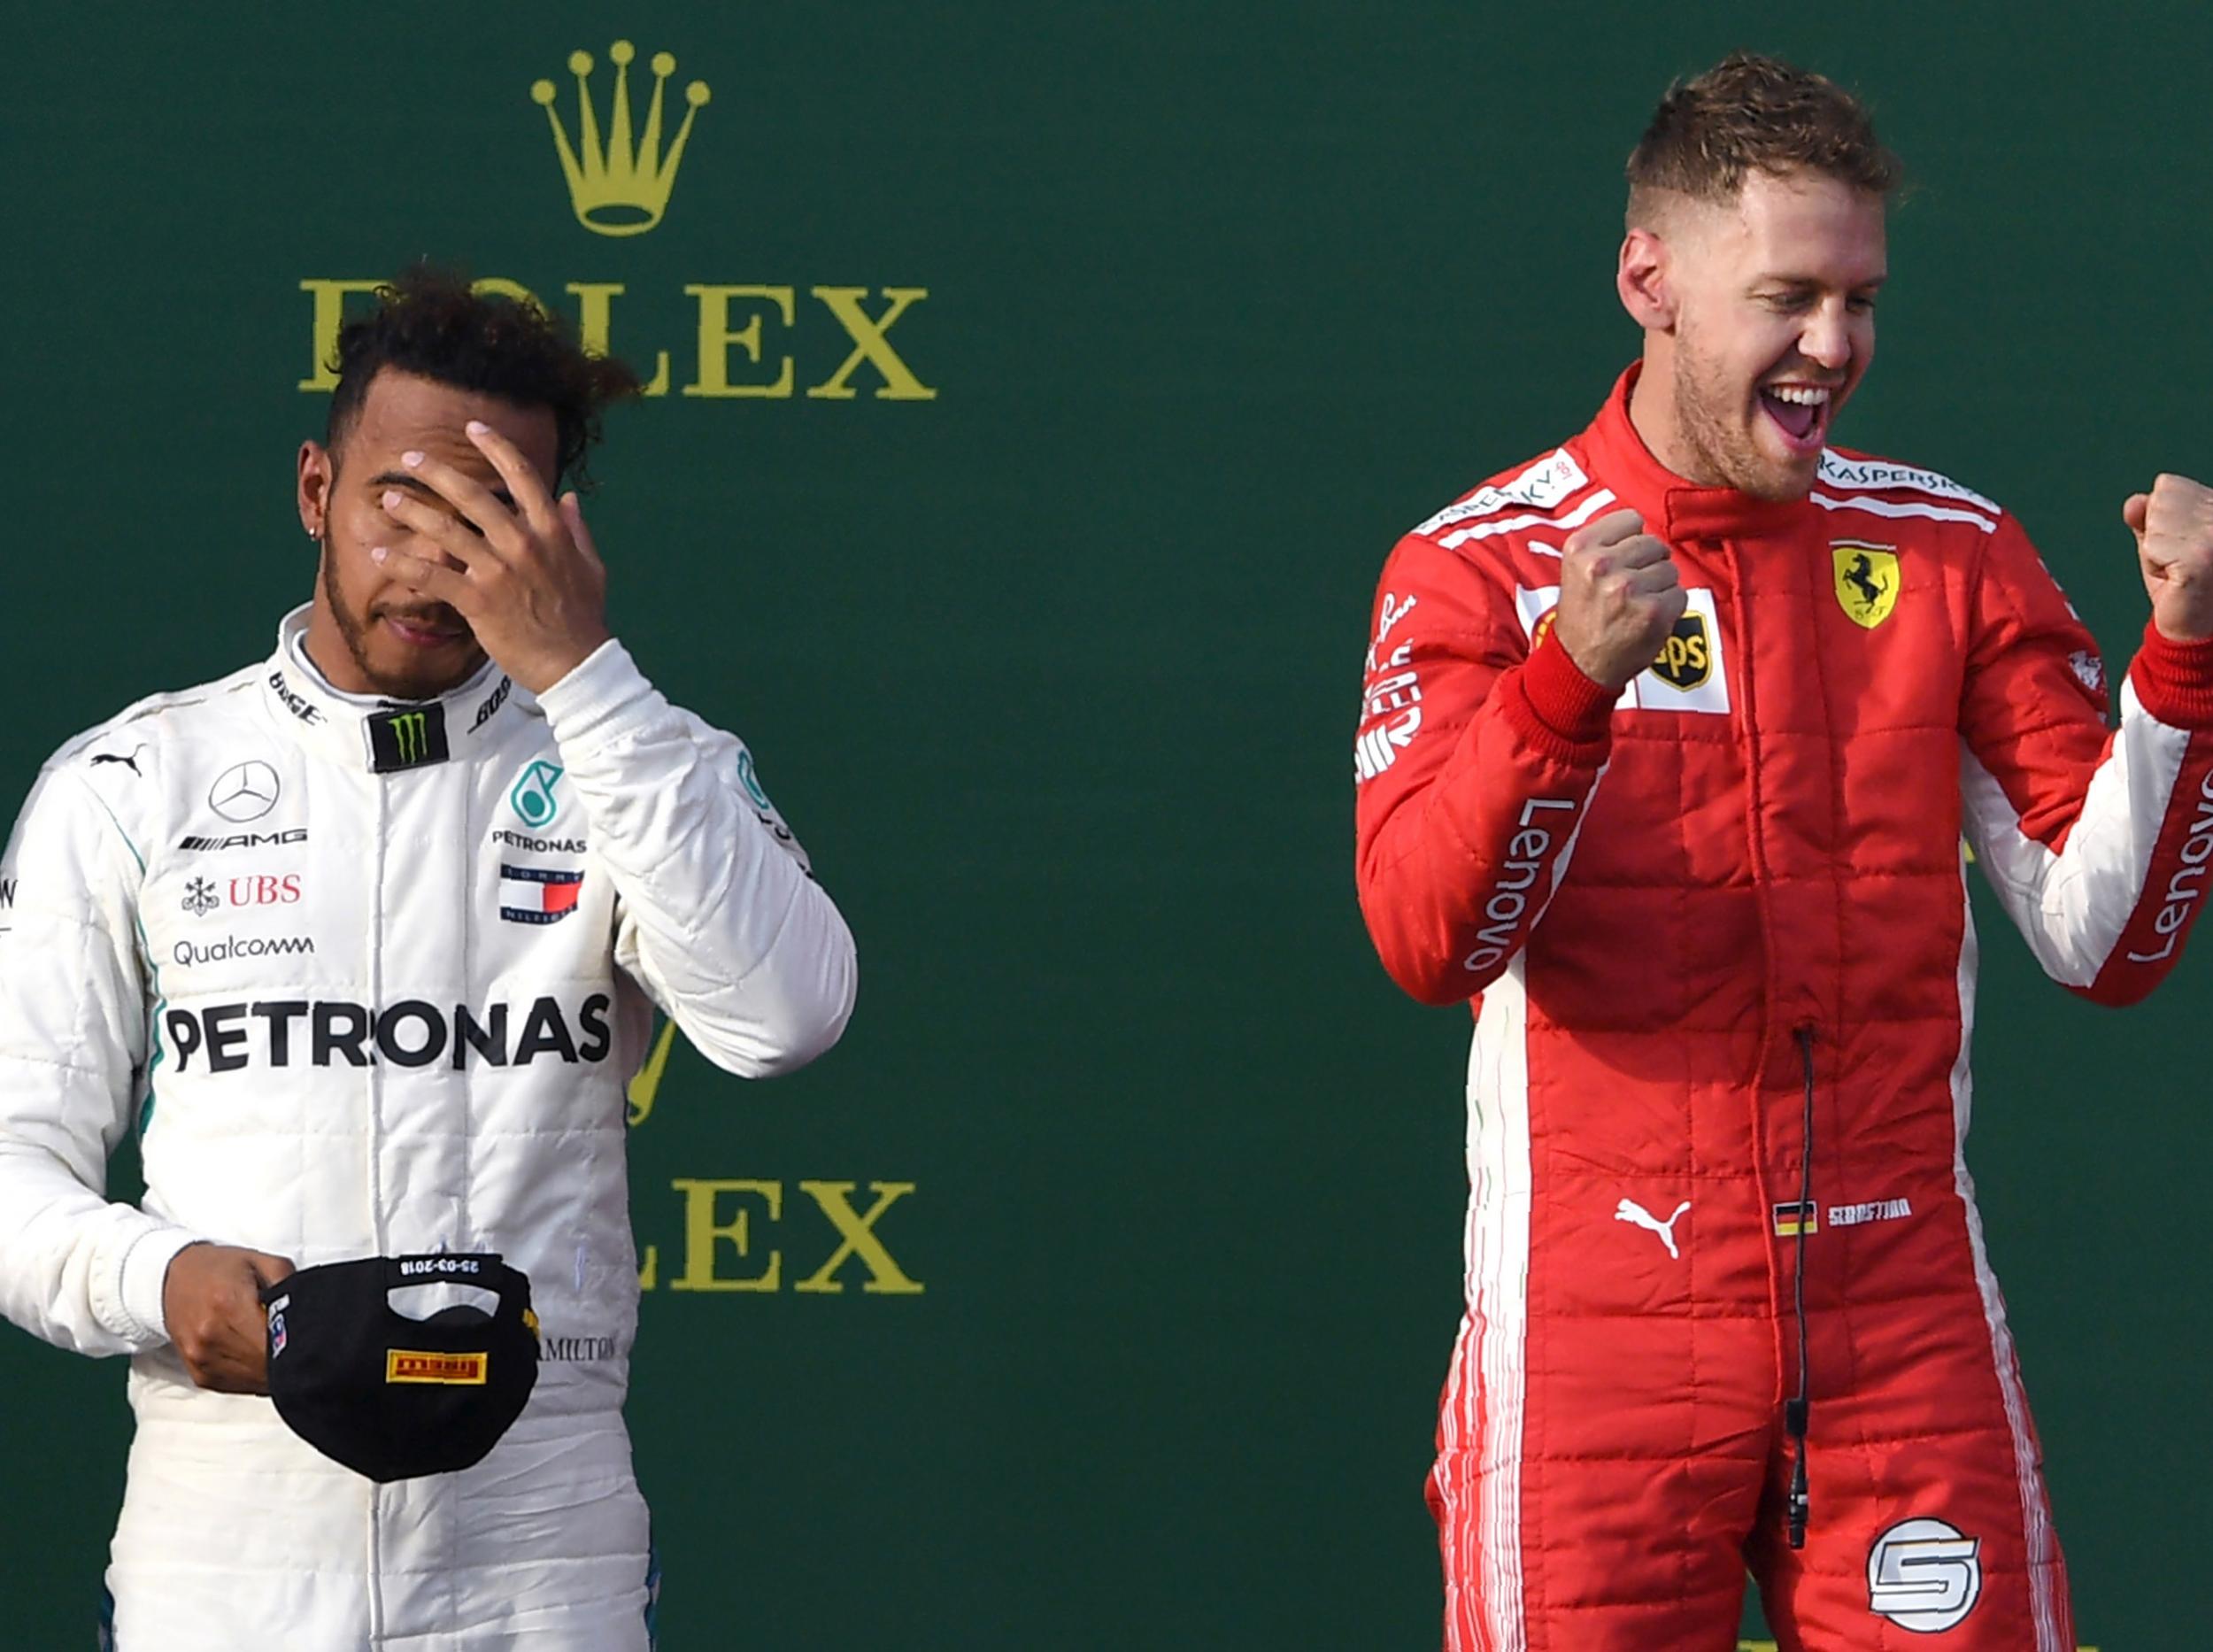 Hamilton was shocked when Vettel emerged from the pits ahead of him